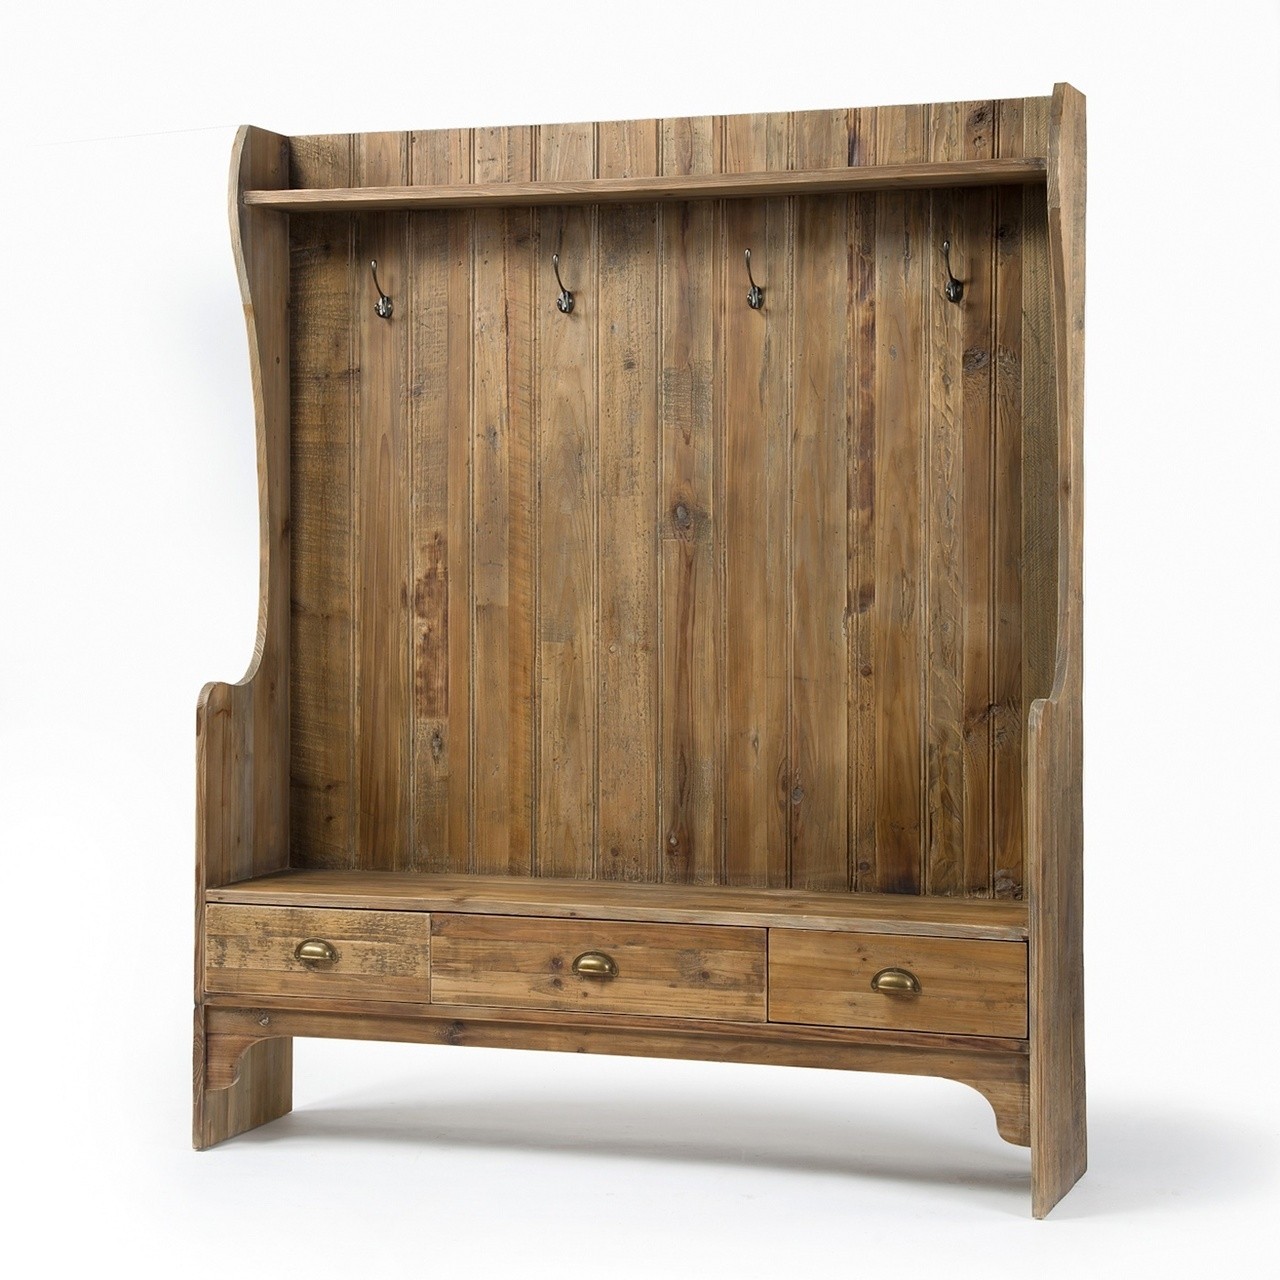 Concord rustic wood entry bench with storage and coat rack